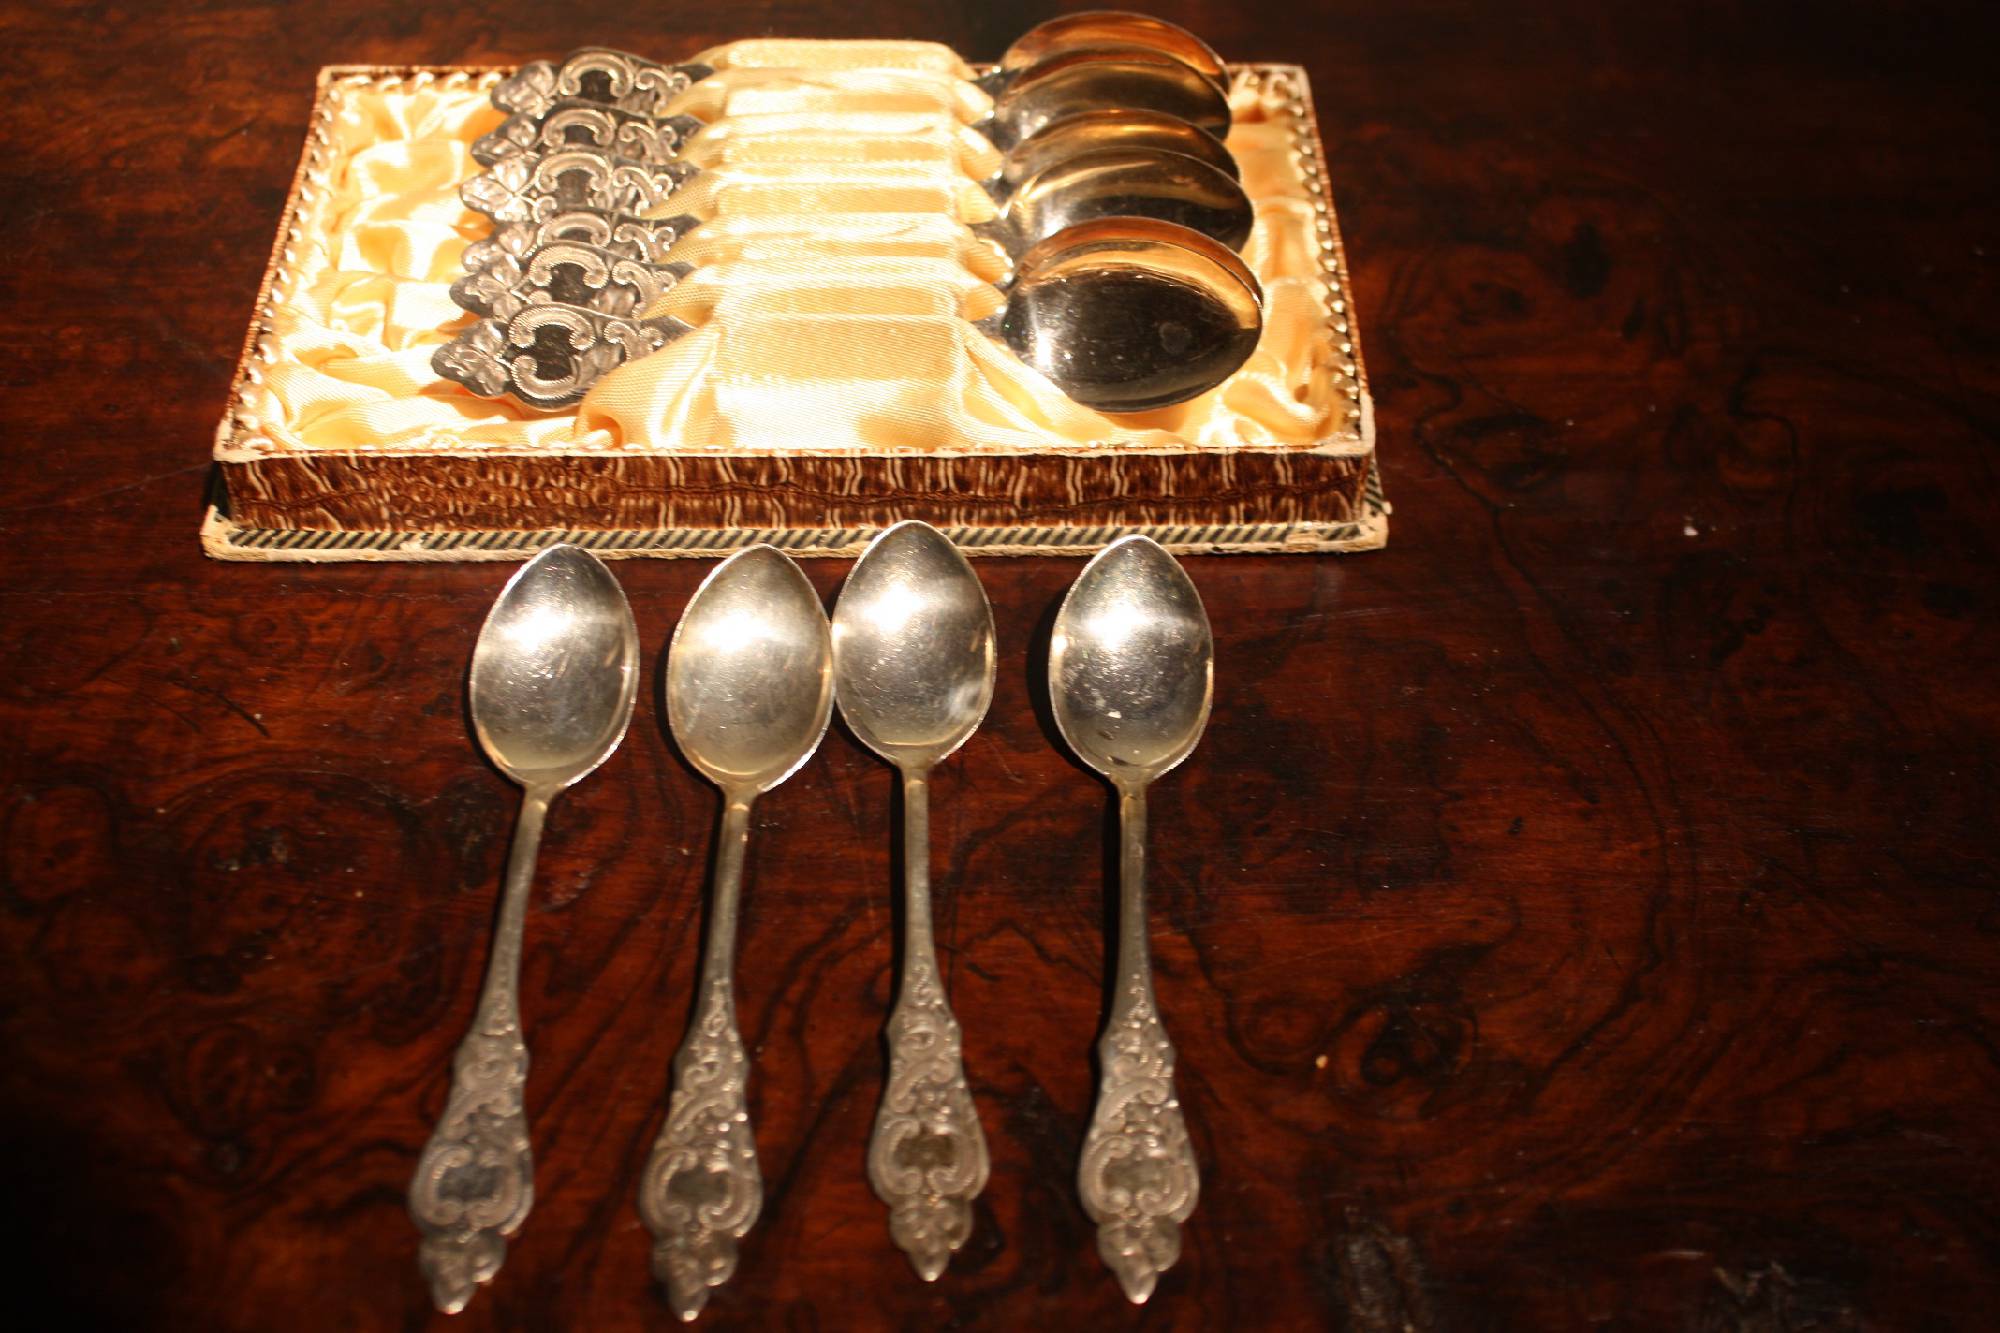 A set of 6 vintage 800 silver tea spoons and 4 matching mocca spoons, marked Robbe and Berking, Germany